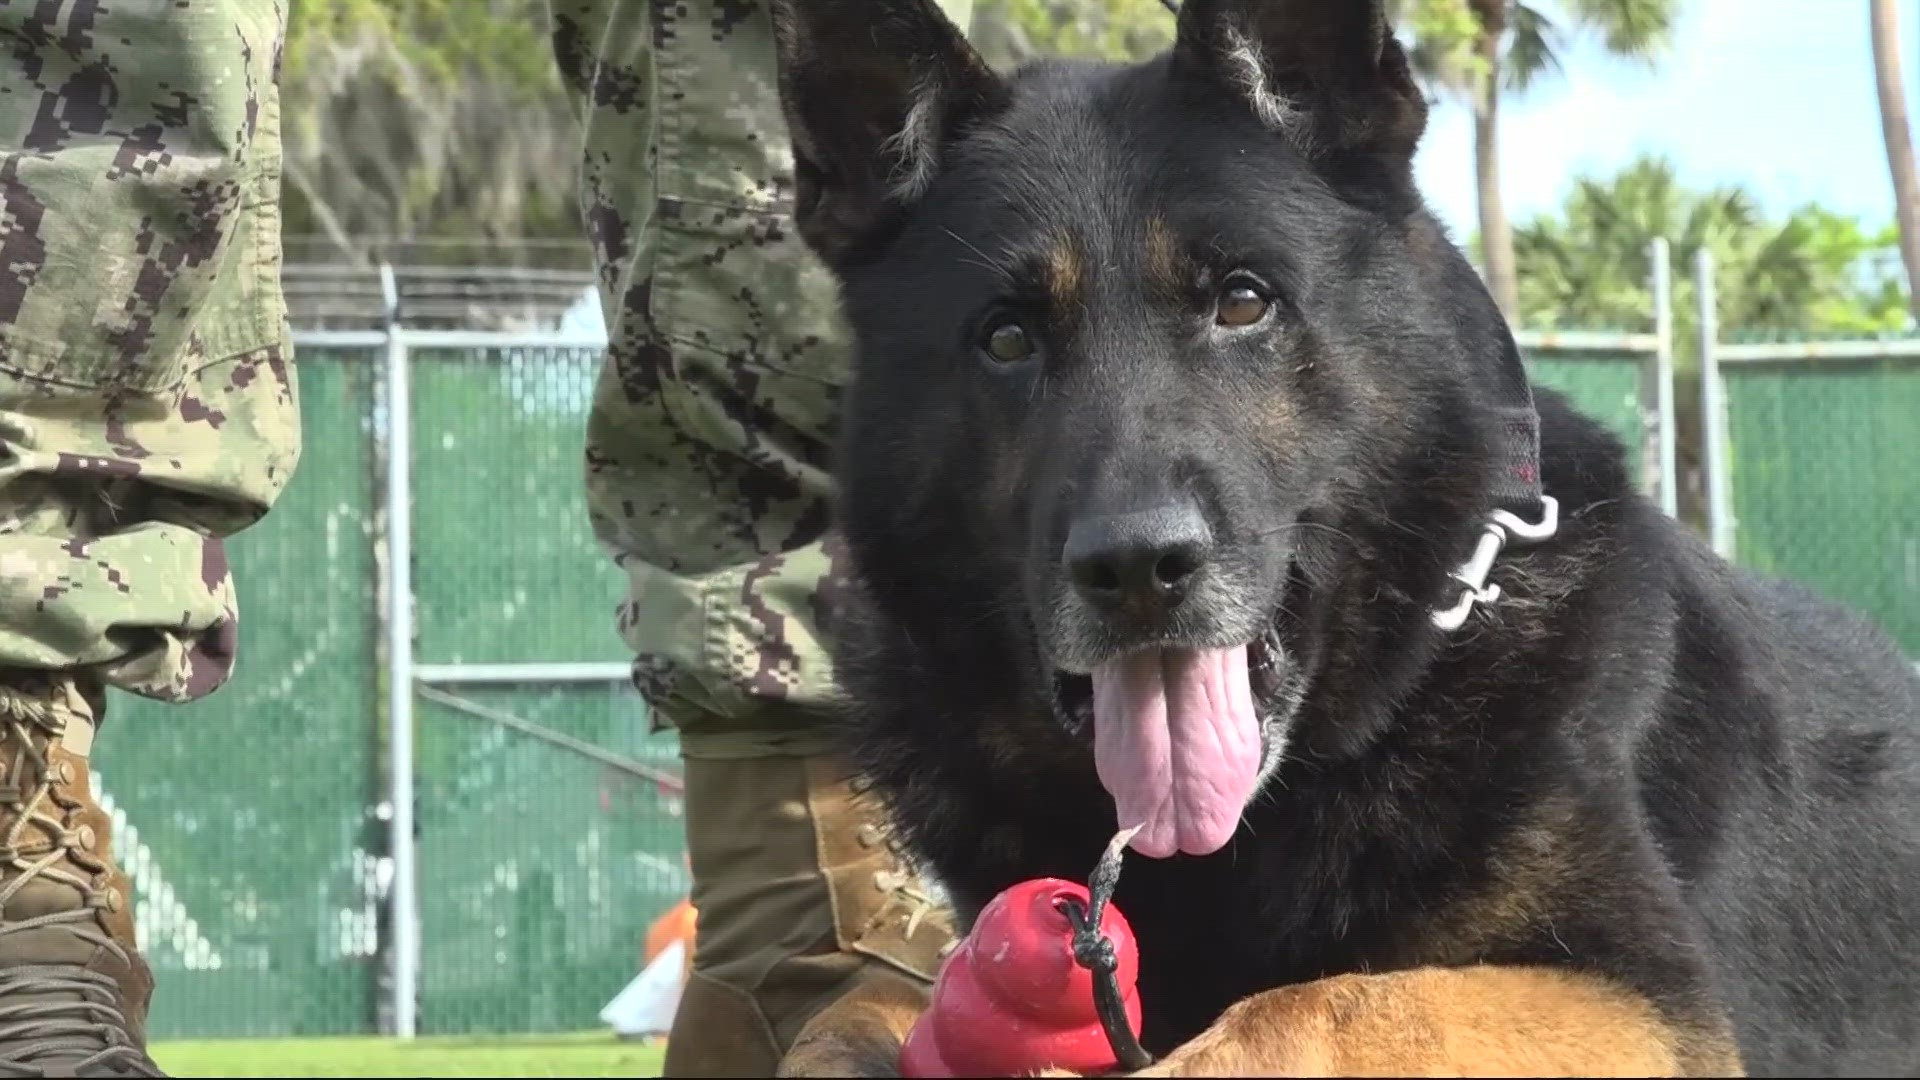 Hero, a military dog credited with saving lives in combat zones, retires as a chief at Naval Station Mayport Wednesday.